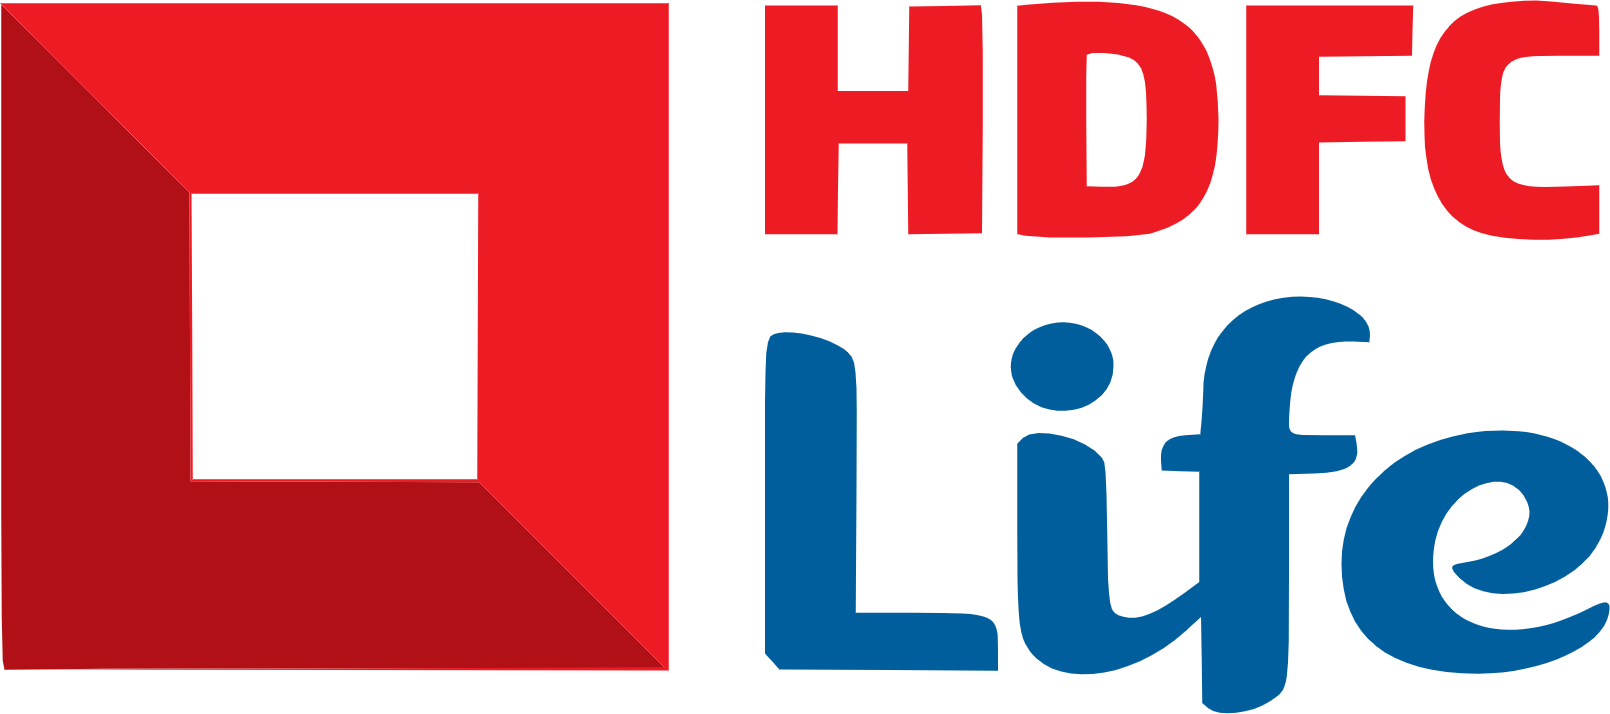 HDFC Life Insurance Company Share Price Today Live Updates: HDFC Life Insurance Closes at Rs 623.65 with 6-Month Beta of 0.8781 